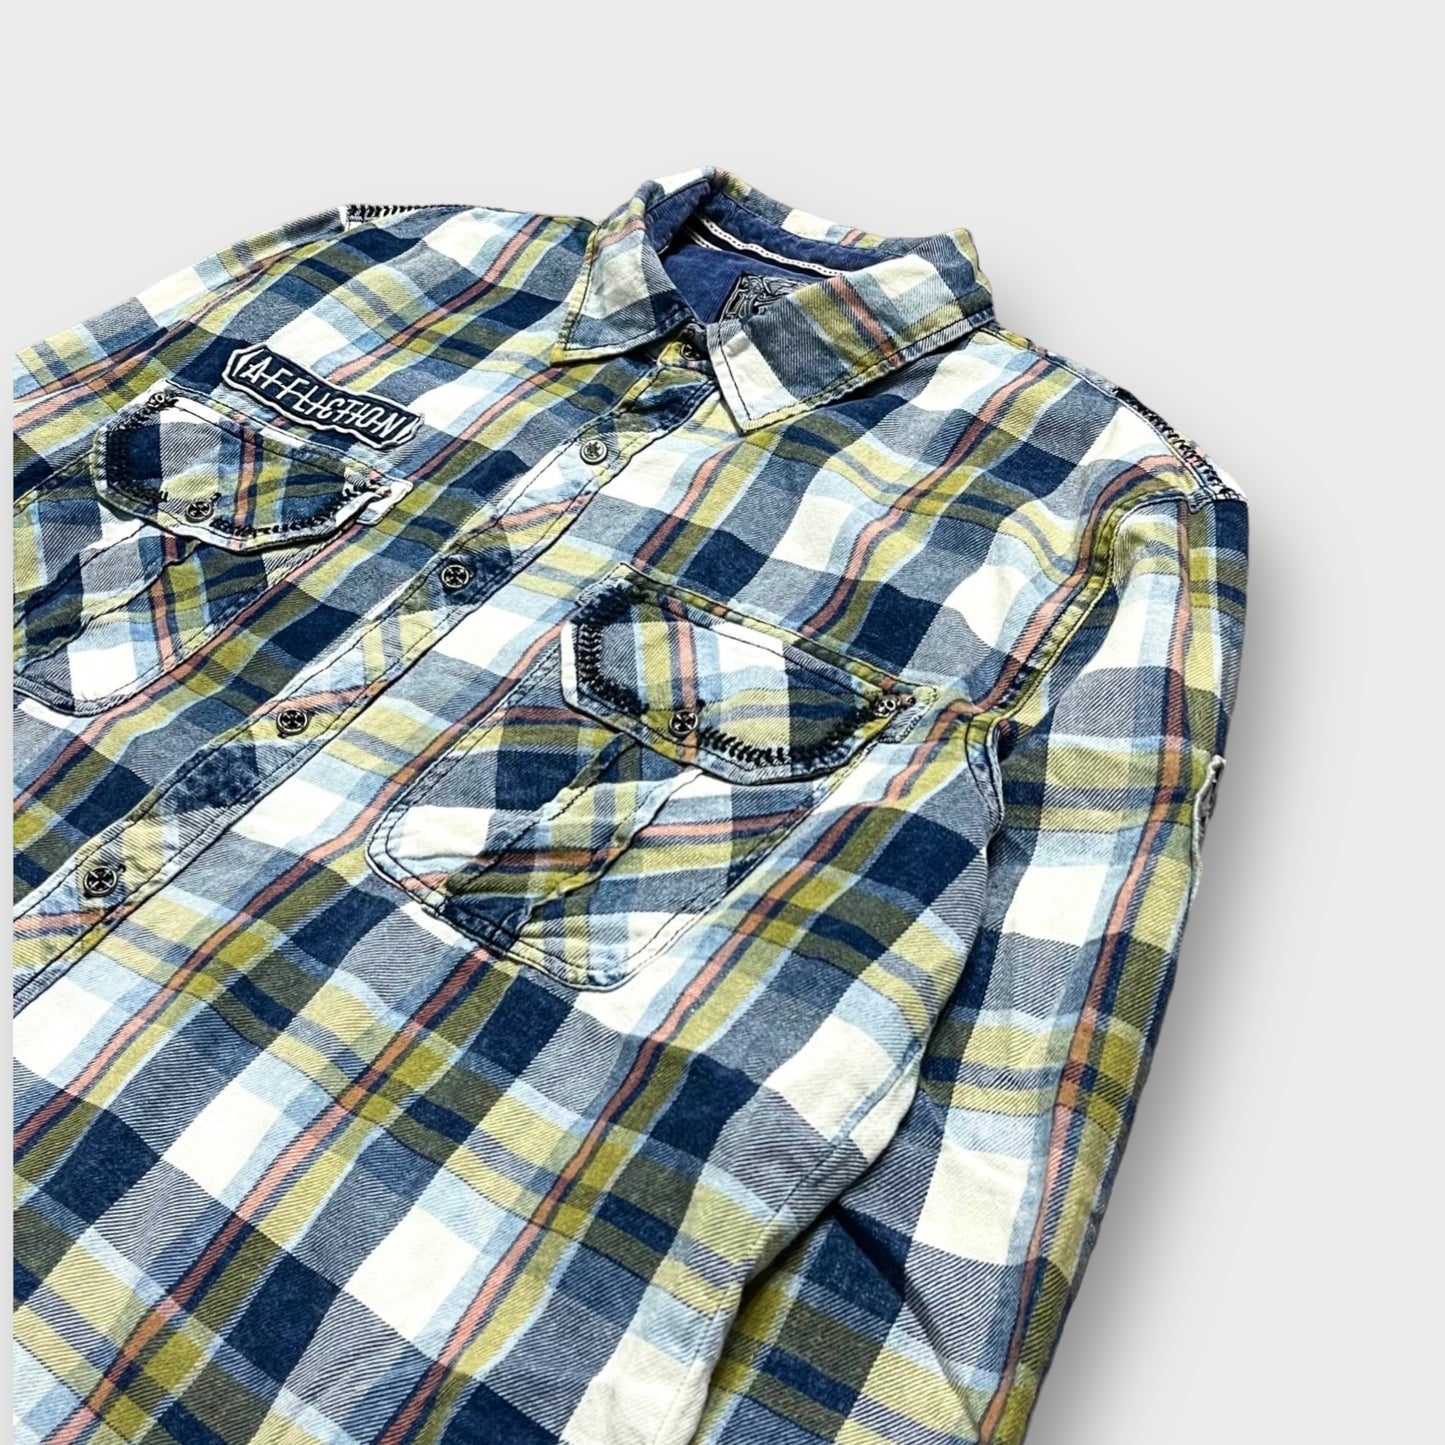 "AFFLICTION" Embroidery plaid pattern shirt